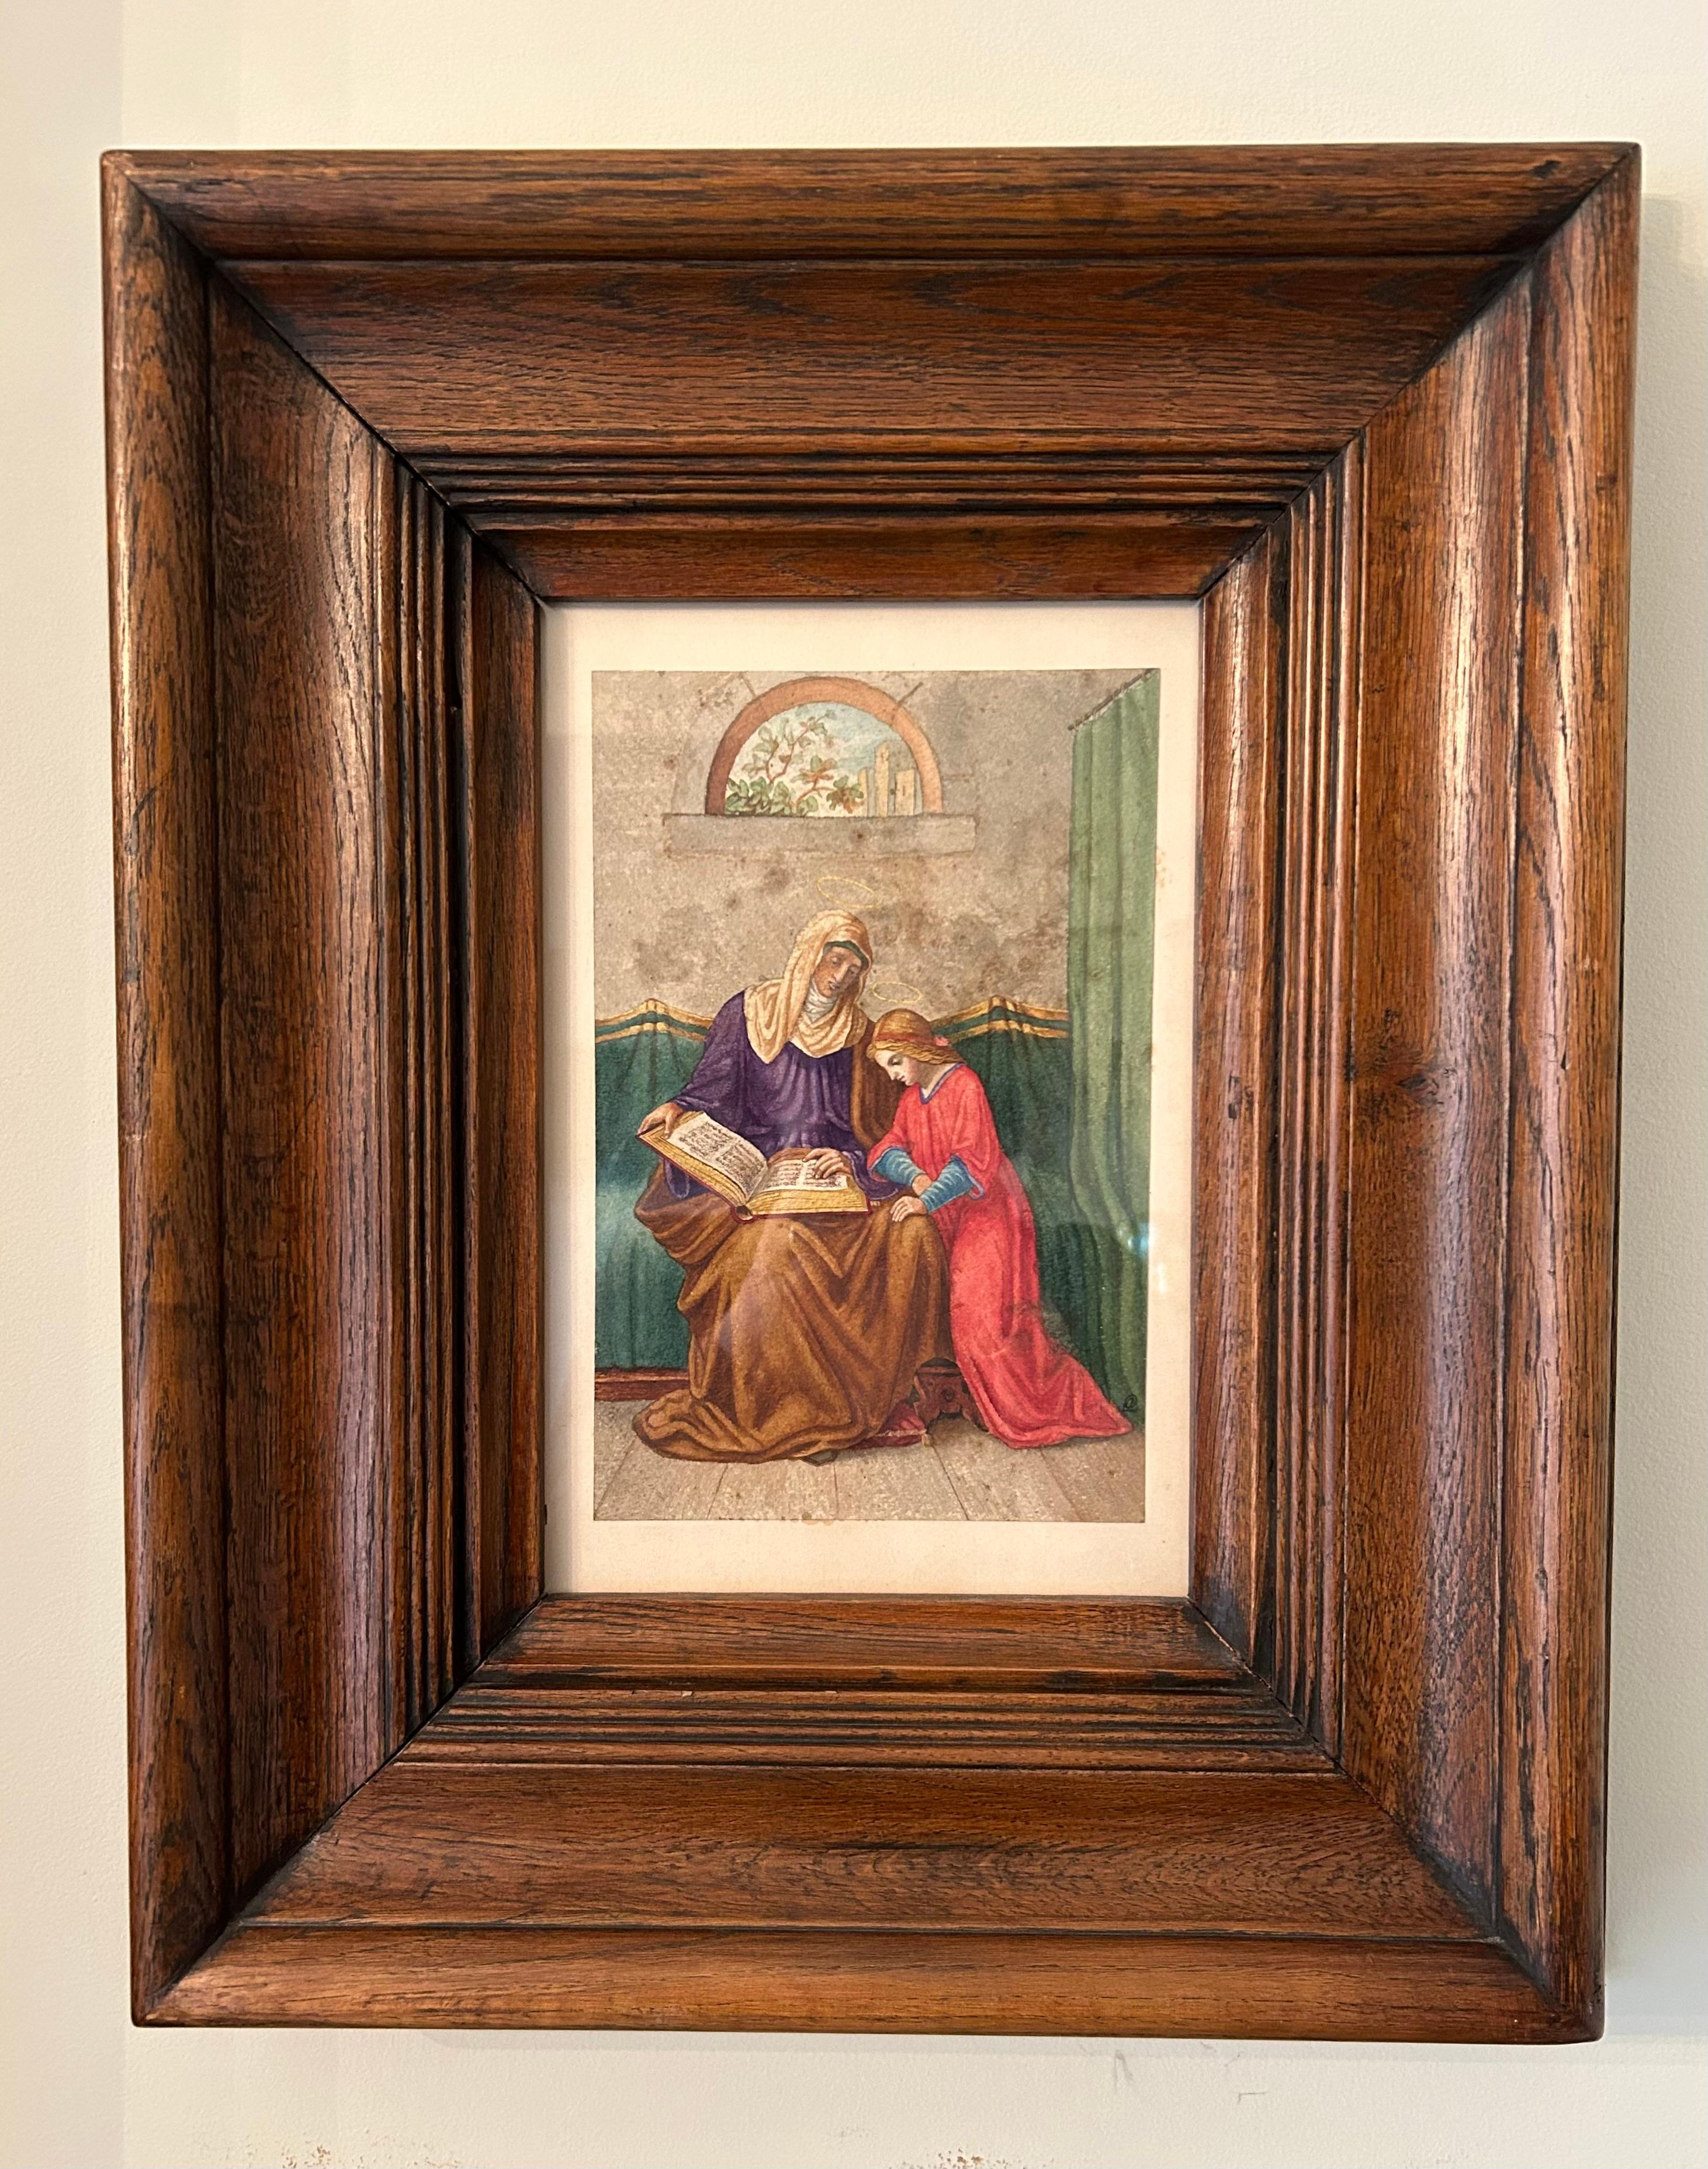 A deeply carved oak frame, English, Nineteenth Century or early 20th Century. Currently with a watercolour depicting Saint Anne teaching the Virgin. 
This incredibly heavy and beautiful oak frame came from a rectory in England. It has a wonderful